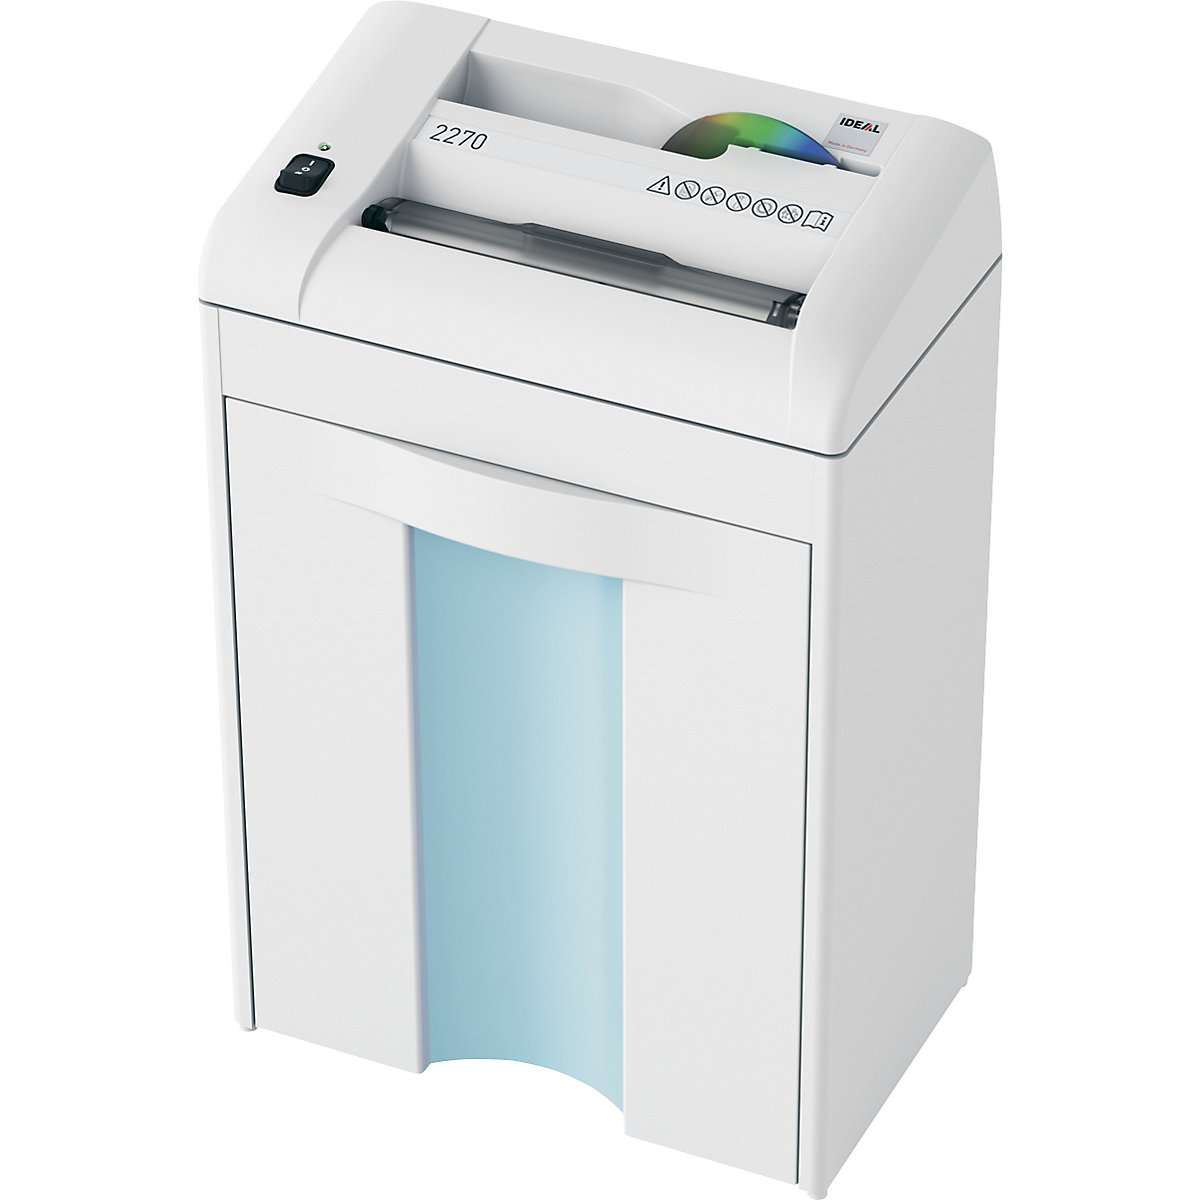 IDEAL – Document shredder 2270, collection capacity 20 l, strips, cut size 4 mm